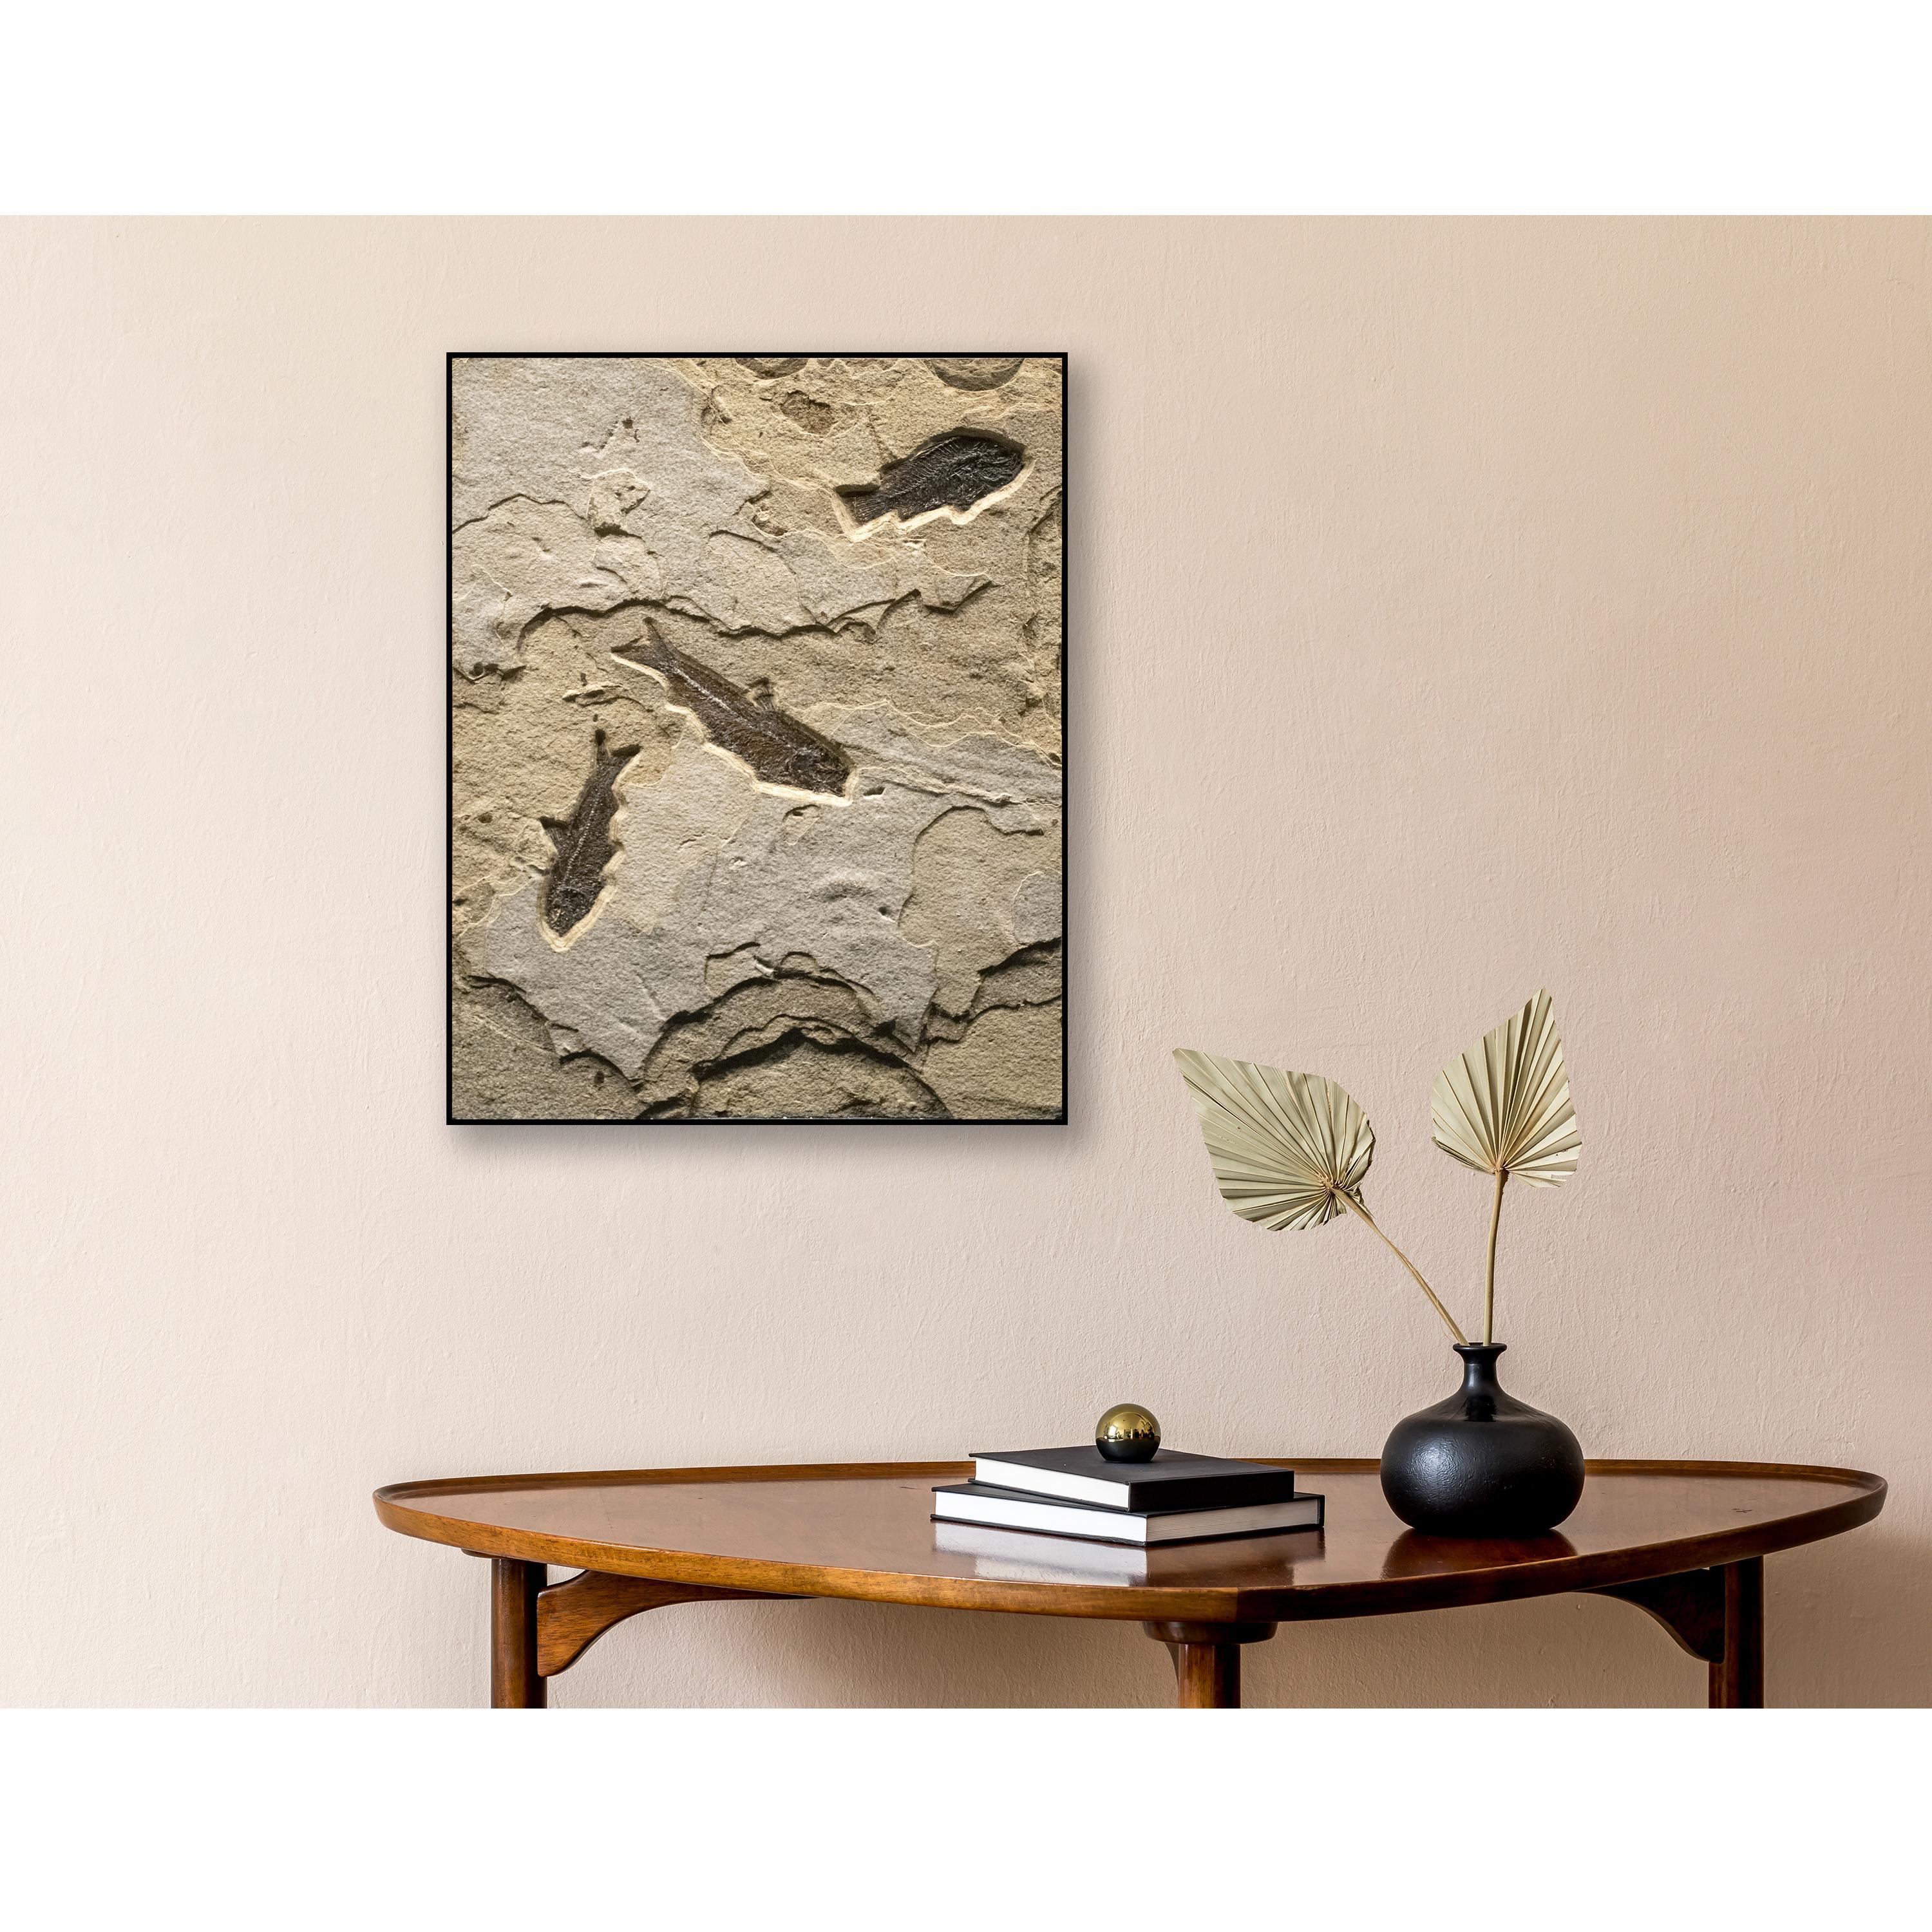 This exquisite fossil mural features a Cockerellites liops (formerly known as Priscacara) and two Knightia eocaena, all of which are Eocene era fossils dating back about 50 million years. These ancient fish are forever preserved in a textured matrix